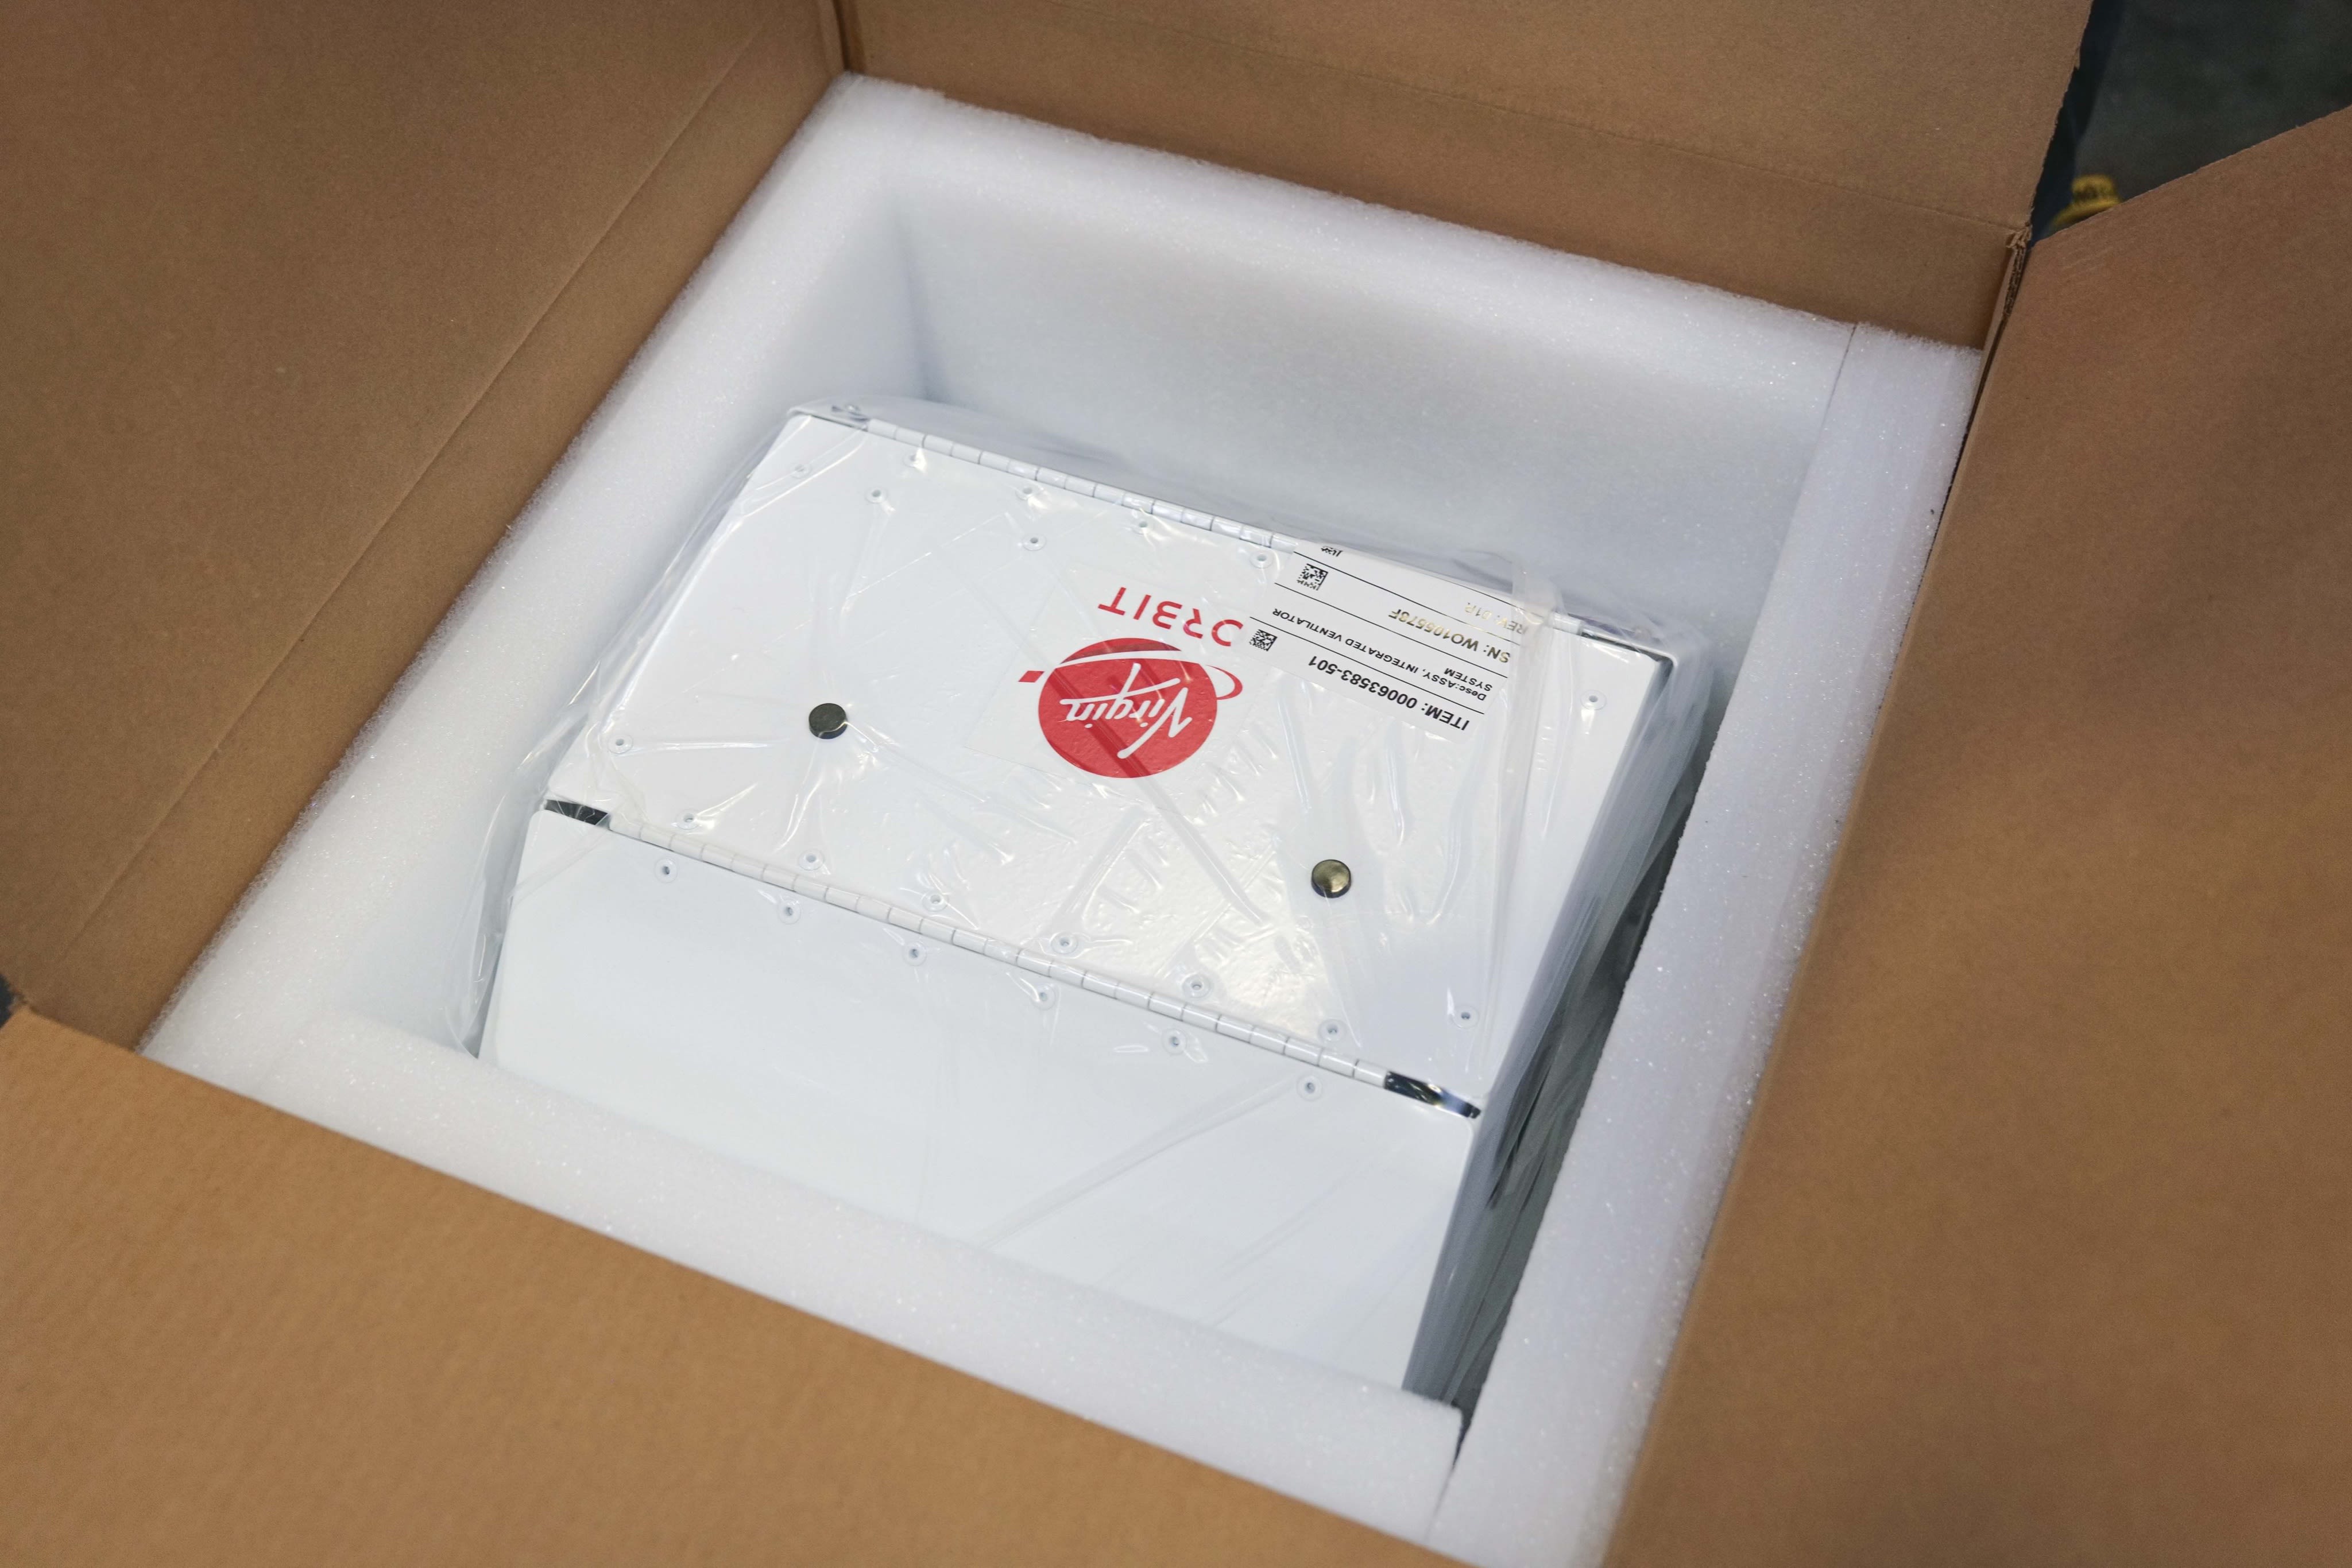 A Virgin Orbit bridge ventilator boxed up ready to be shipped to a hospital